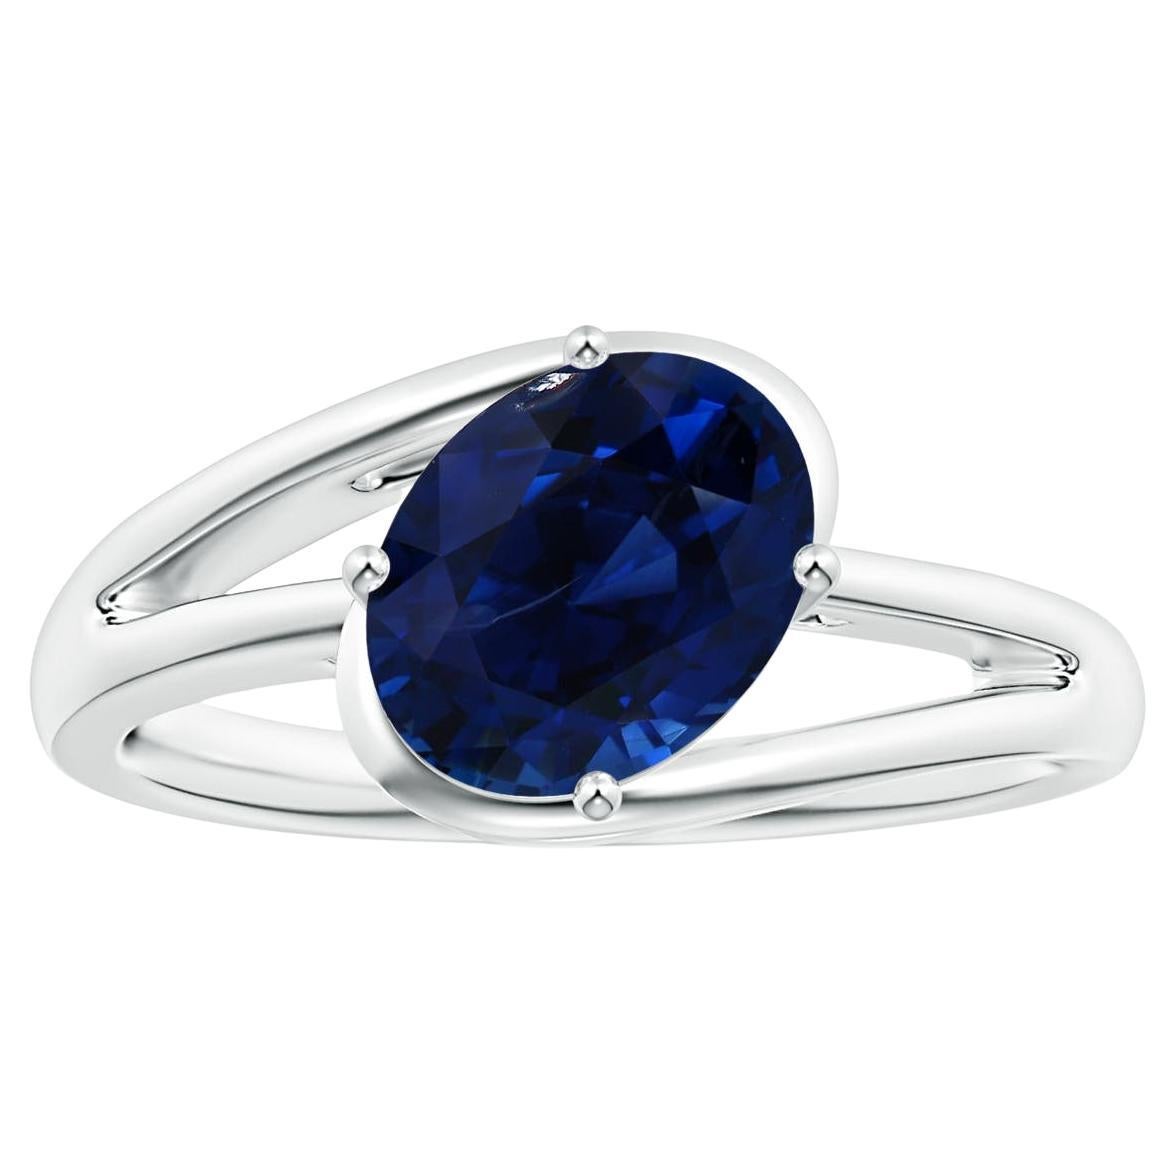 ANGARA GIA Certified Natural Sapphire Solitaire Ring in Platinum